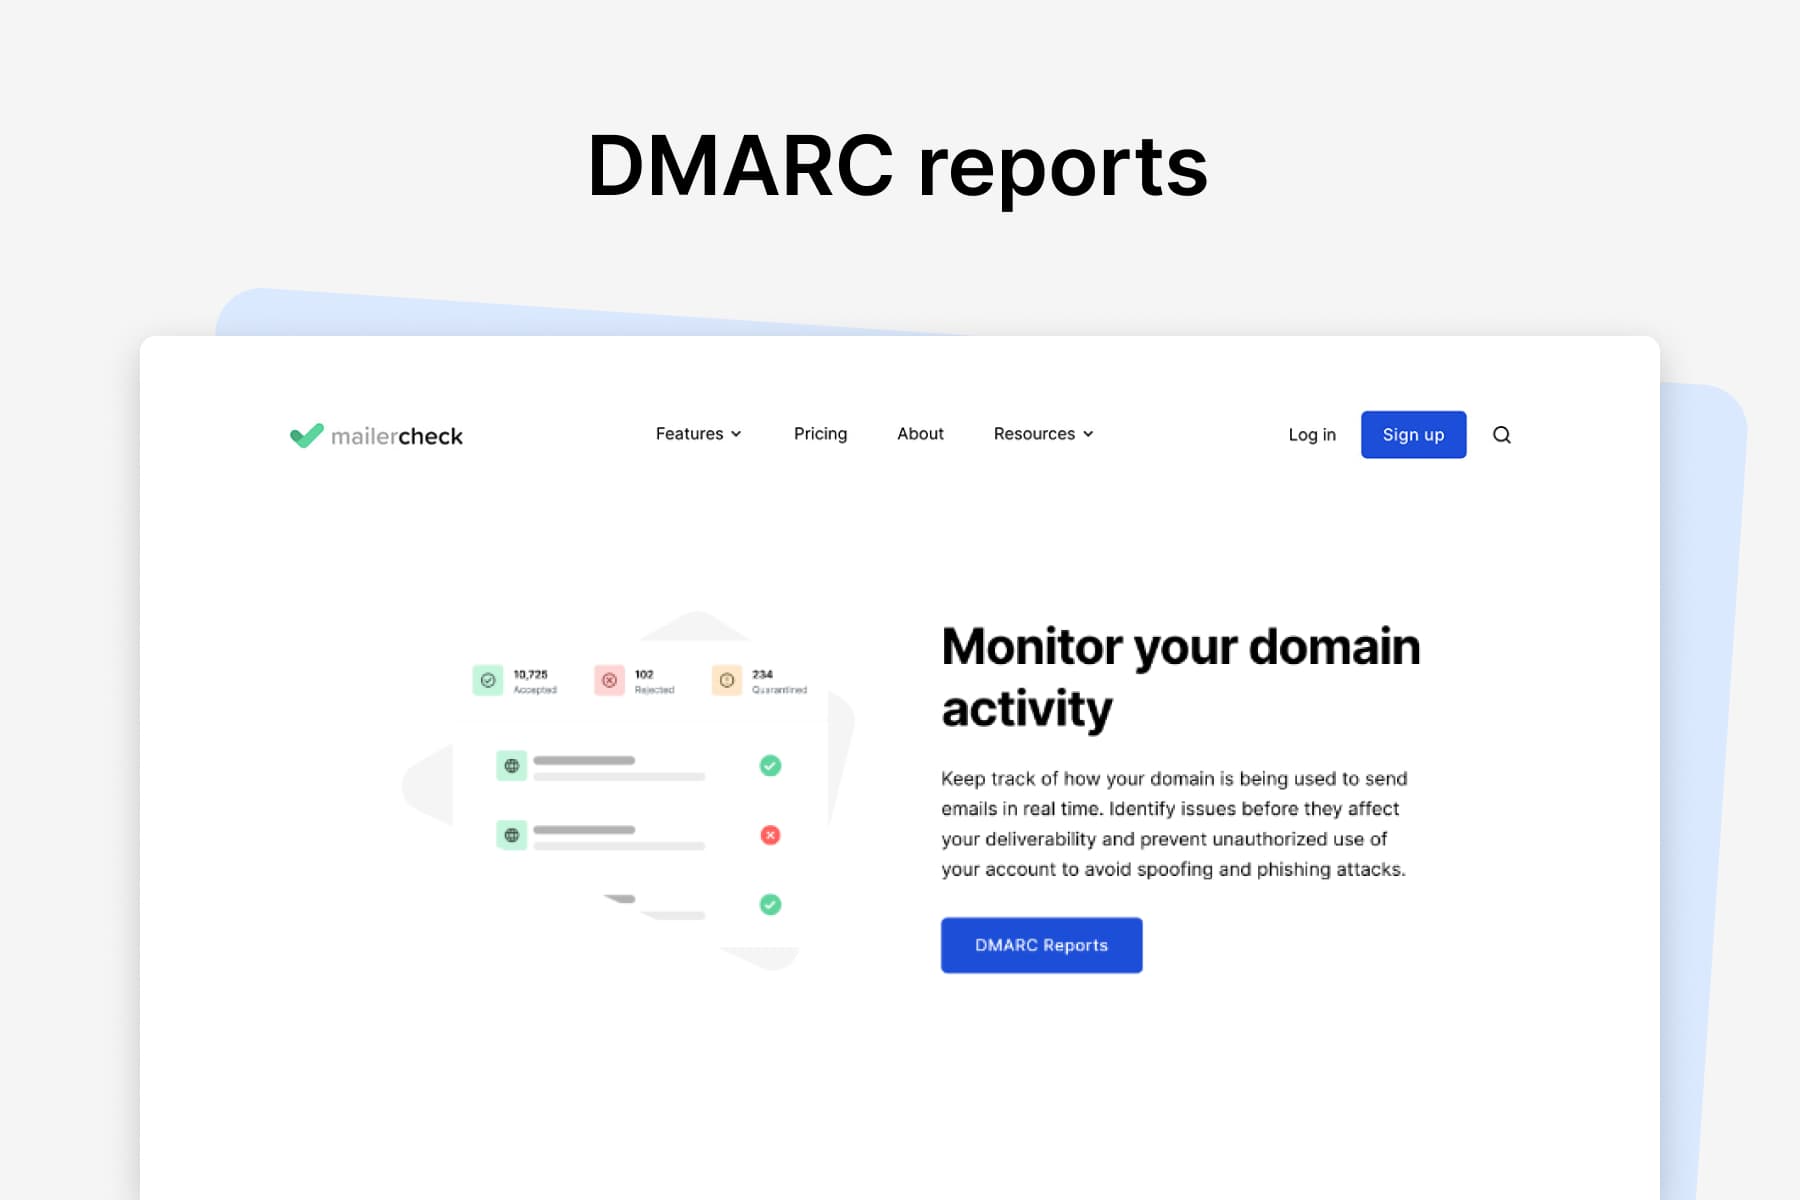 DMARC monitoring tracks the use of your domain in real-time, protecting your account against unauthorized activity.